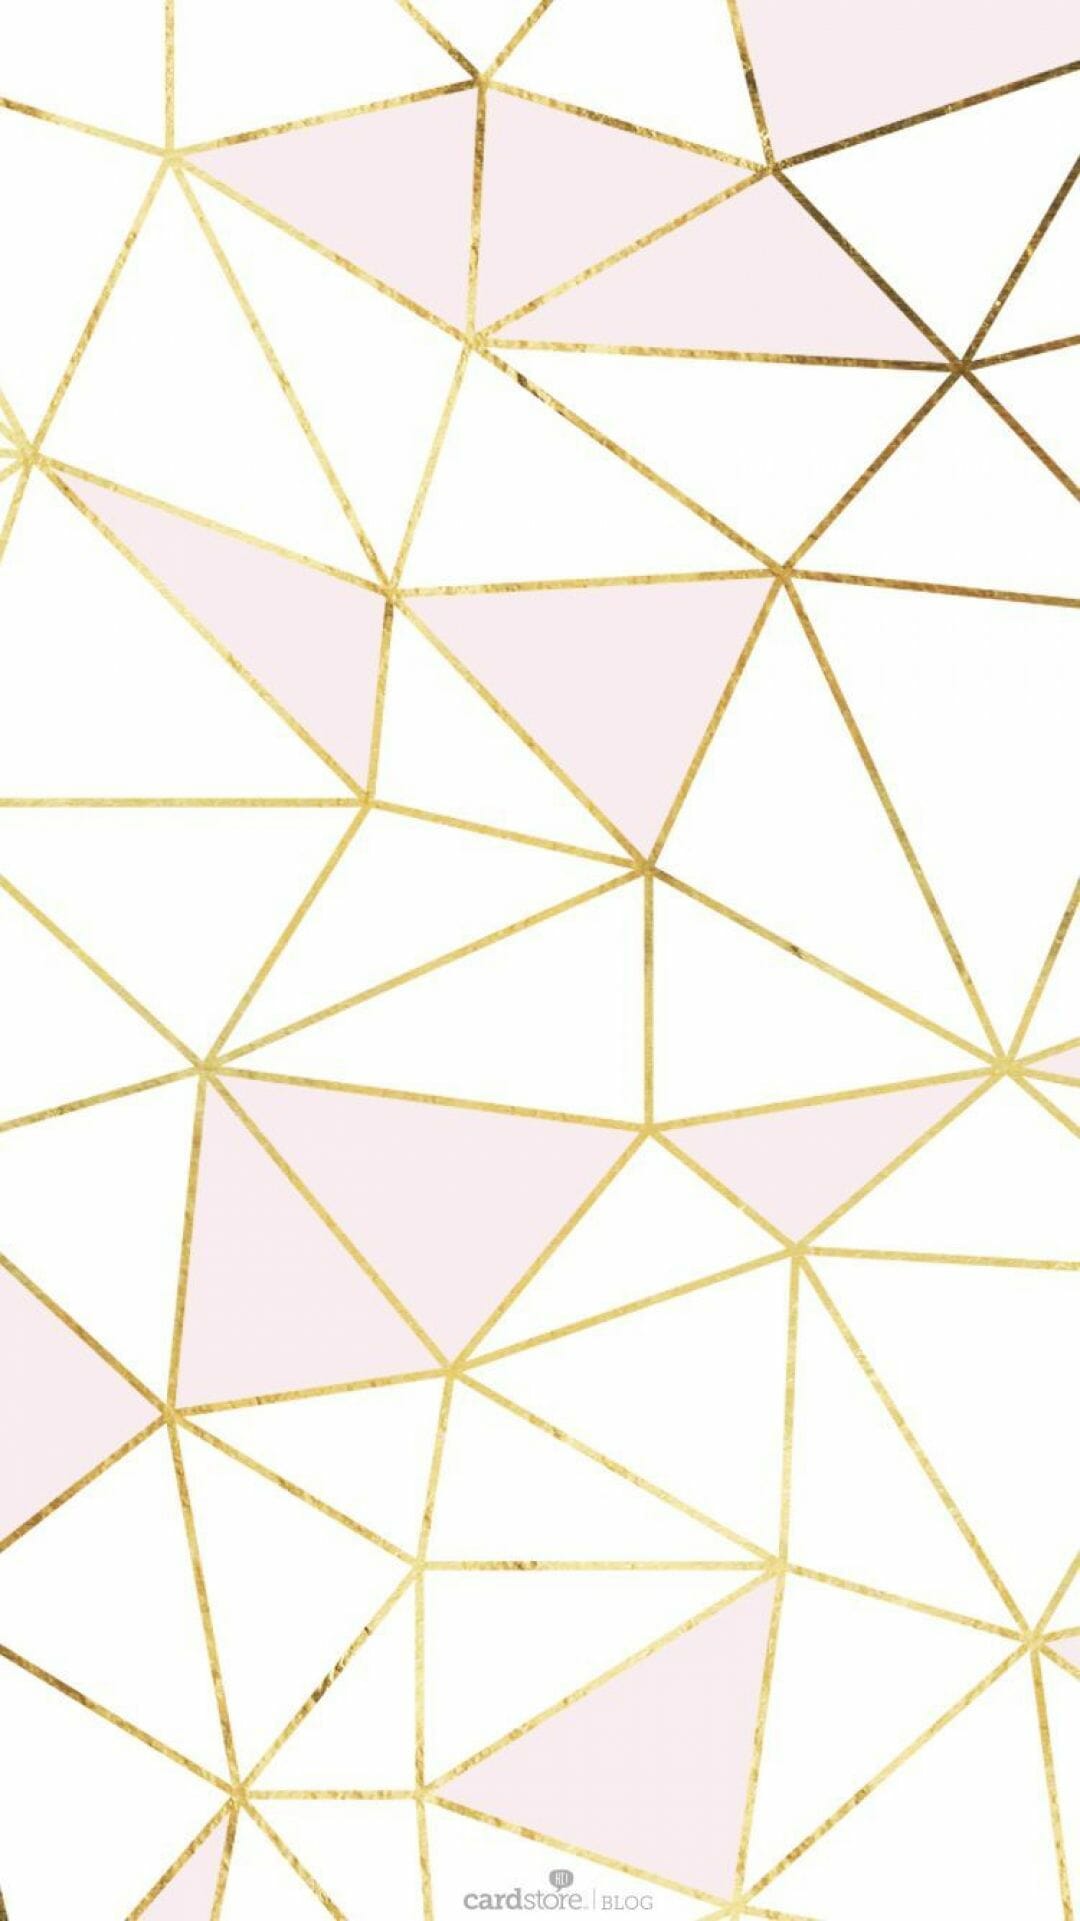 A gold and pink geometric pattern - Gold